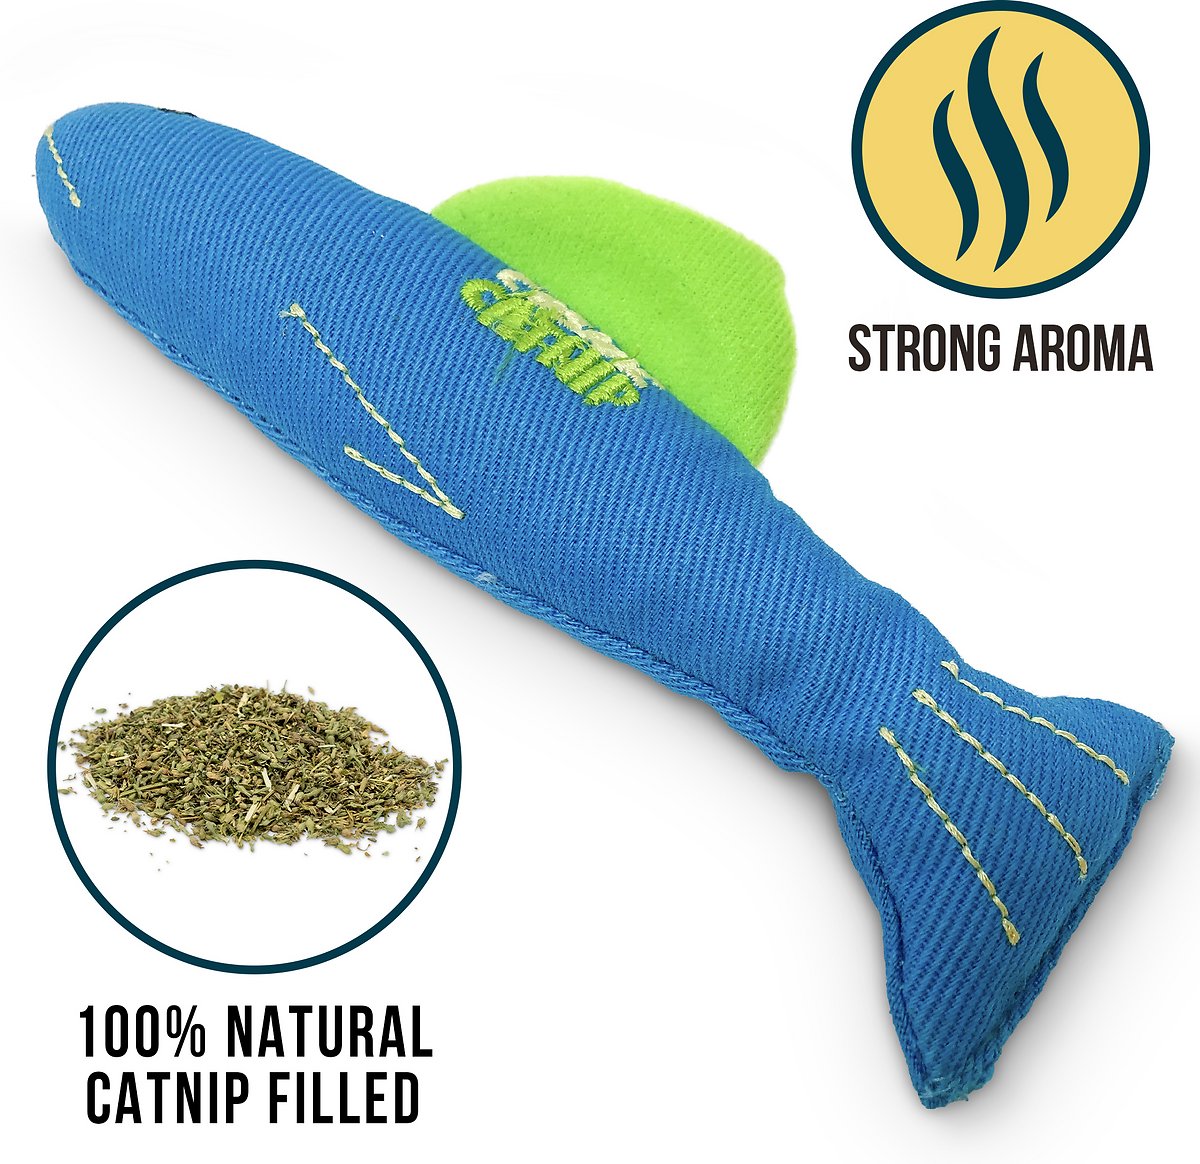 Annette Fish Cat Toy with 100% Natural Catnip.